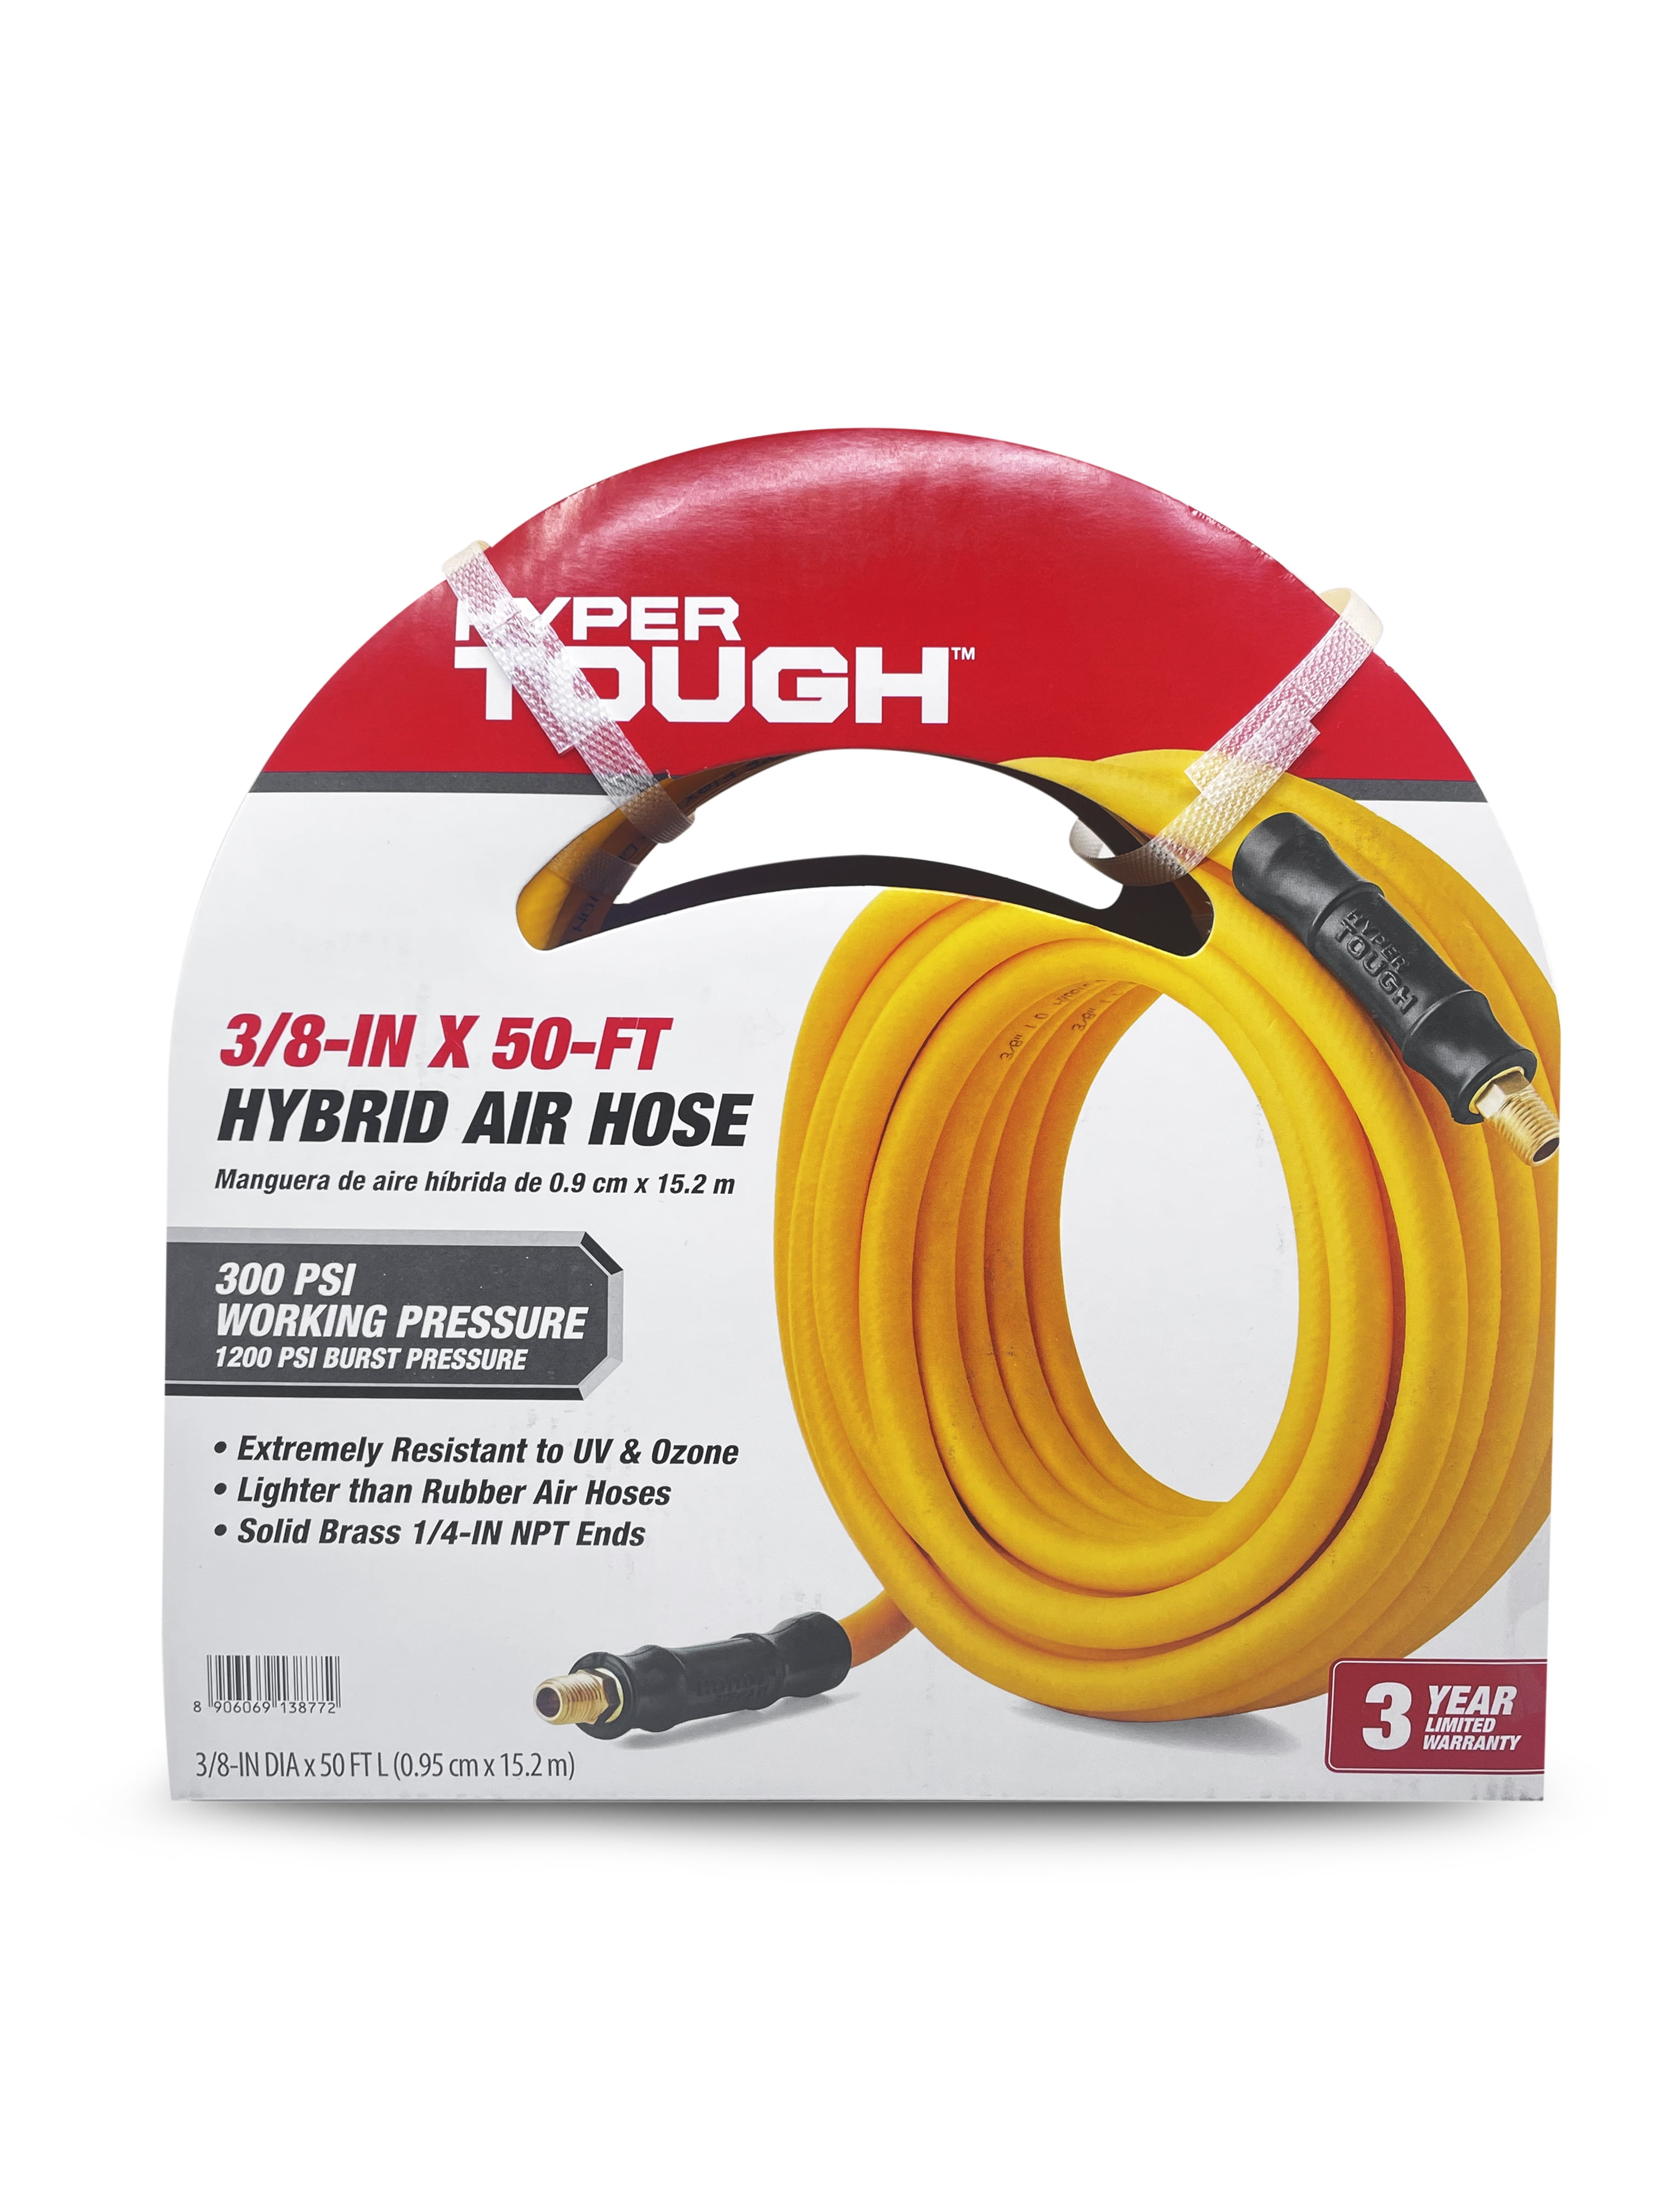 1/2" x 100 Ft Heavy Duty Air Hose Up to 300 PSI with Solid Brass MalebCouplings 